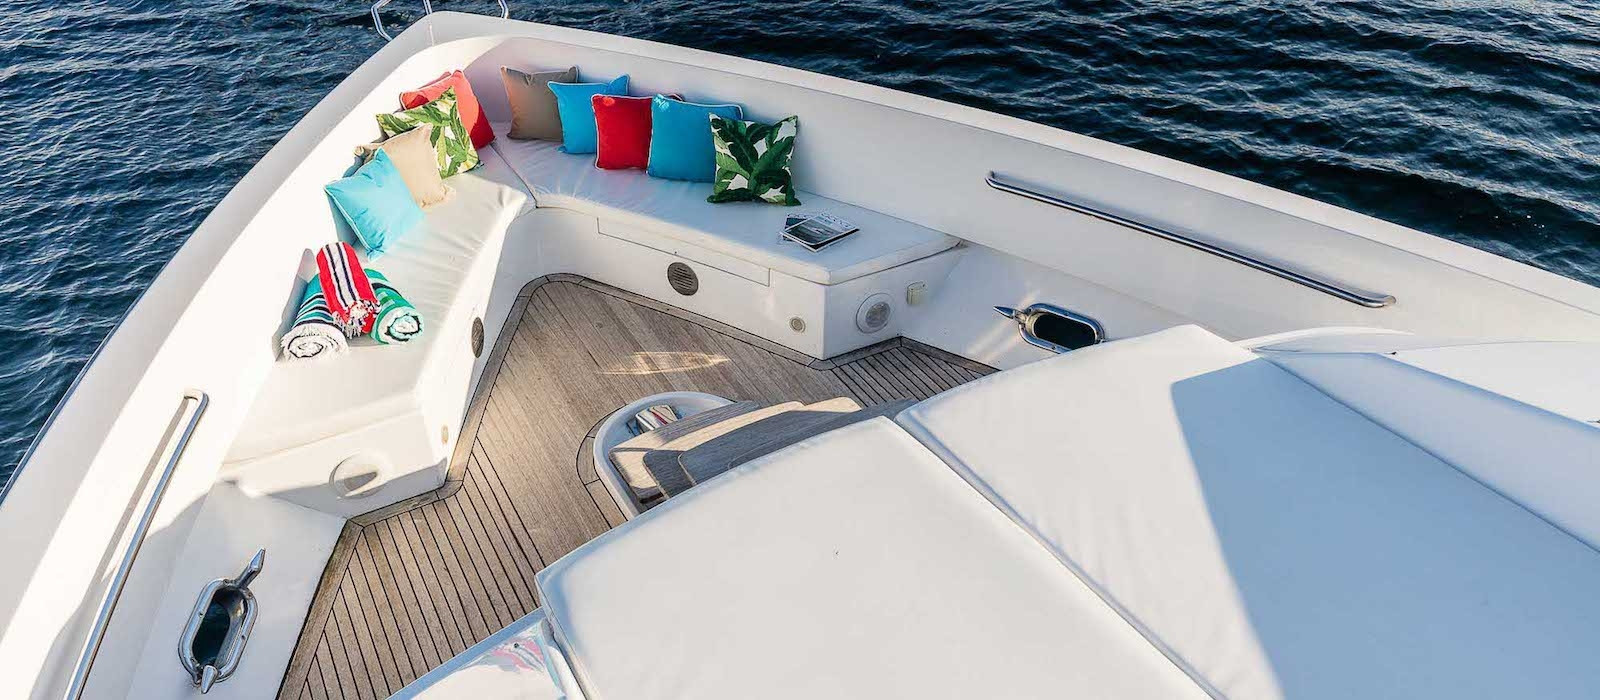 AQA luxury boat hire bow lounges